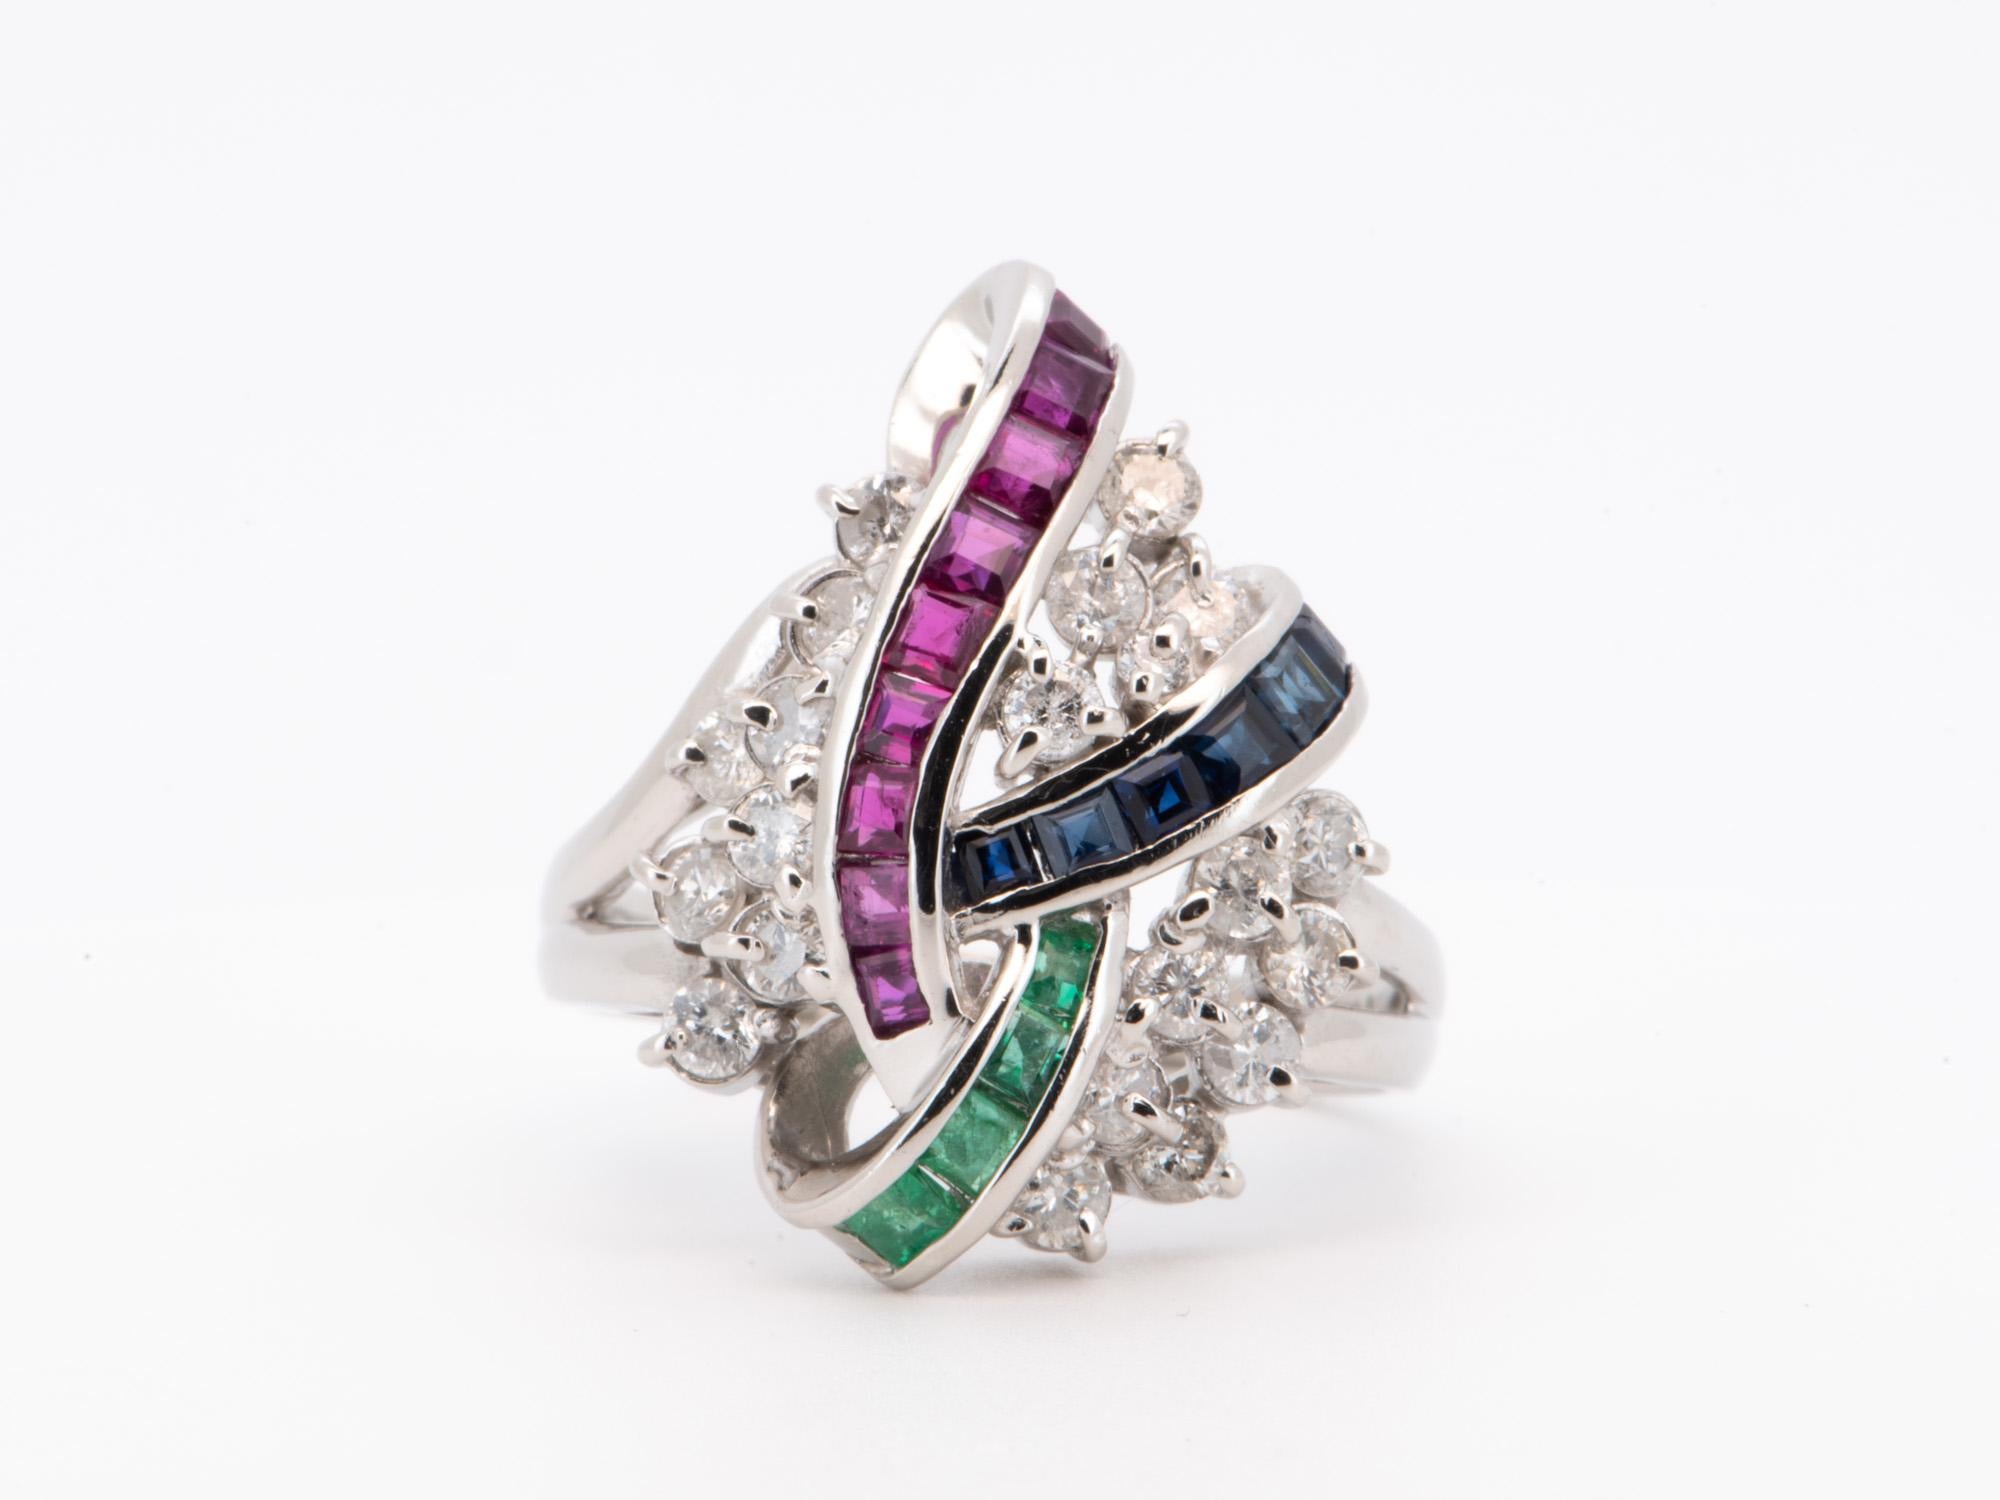 ♥ A stunning cluster design ring set with princess-cut rubies, sapphires, and emeralds (all earth-mined real gemstones), and glistening diamond rounds interspersed in between the colored stones
♥ Beautiful design and has a nice weight on the hand!
♥